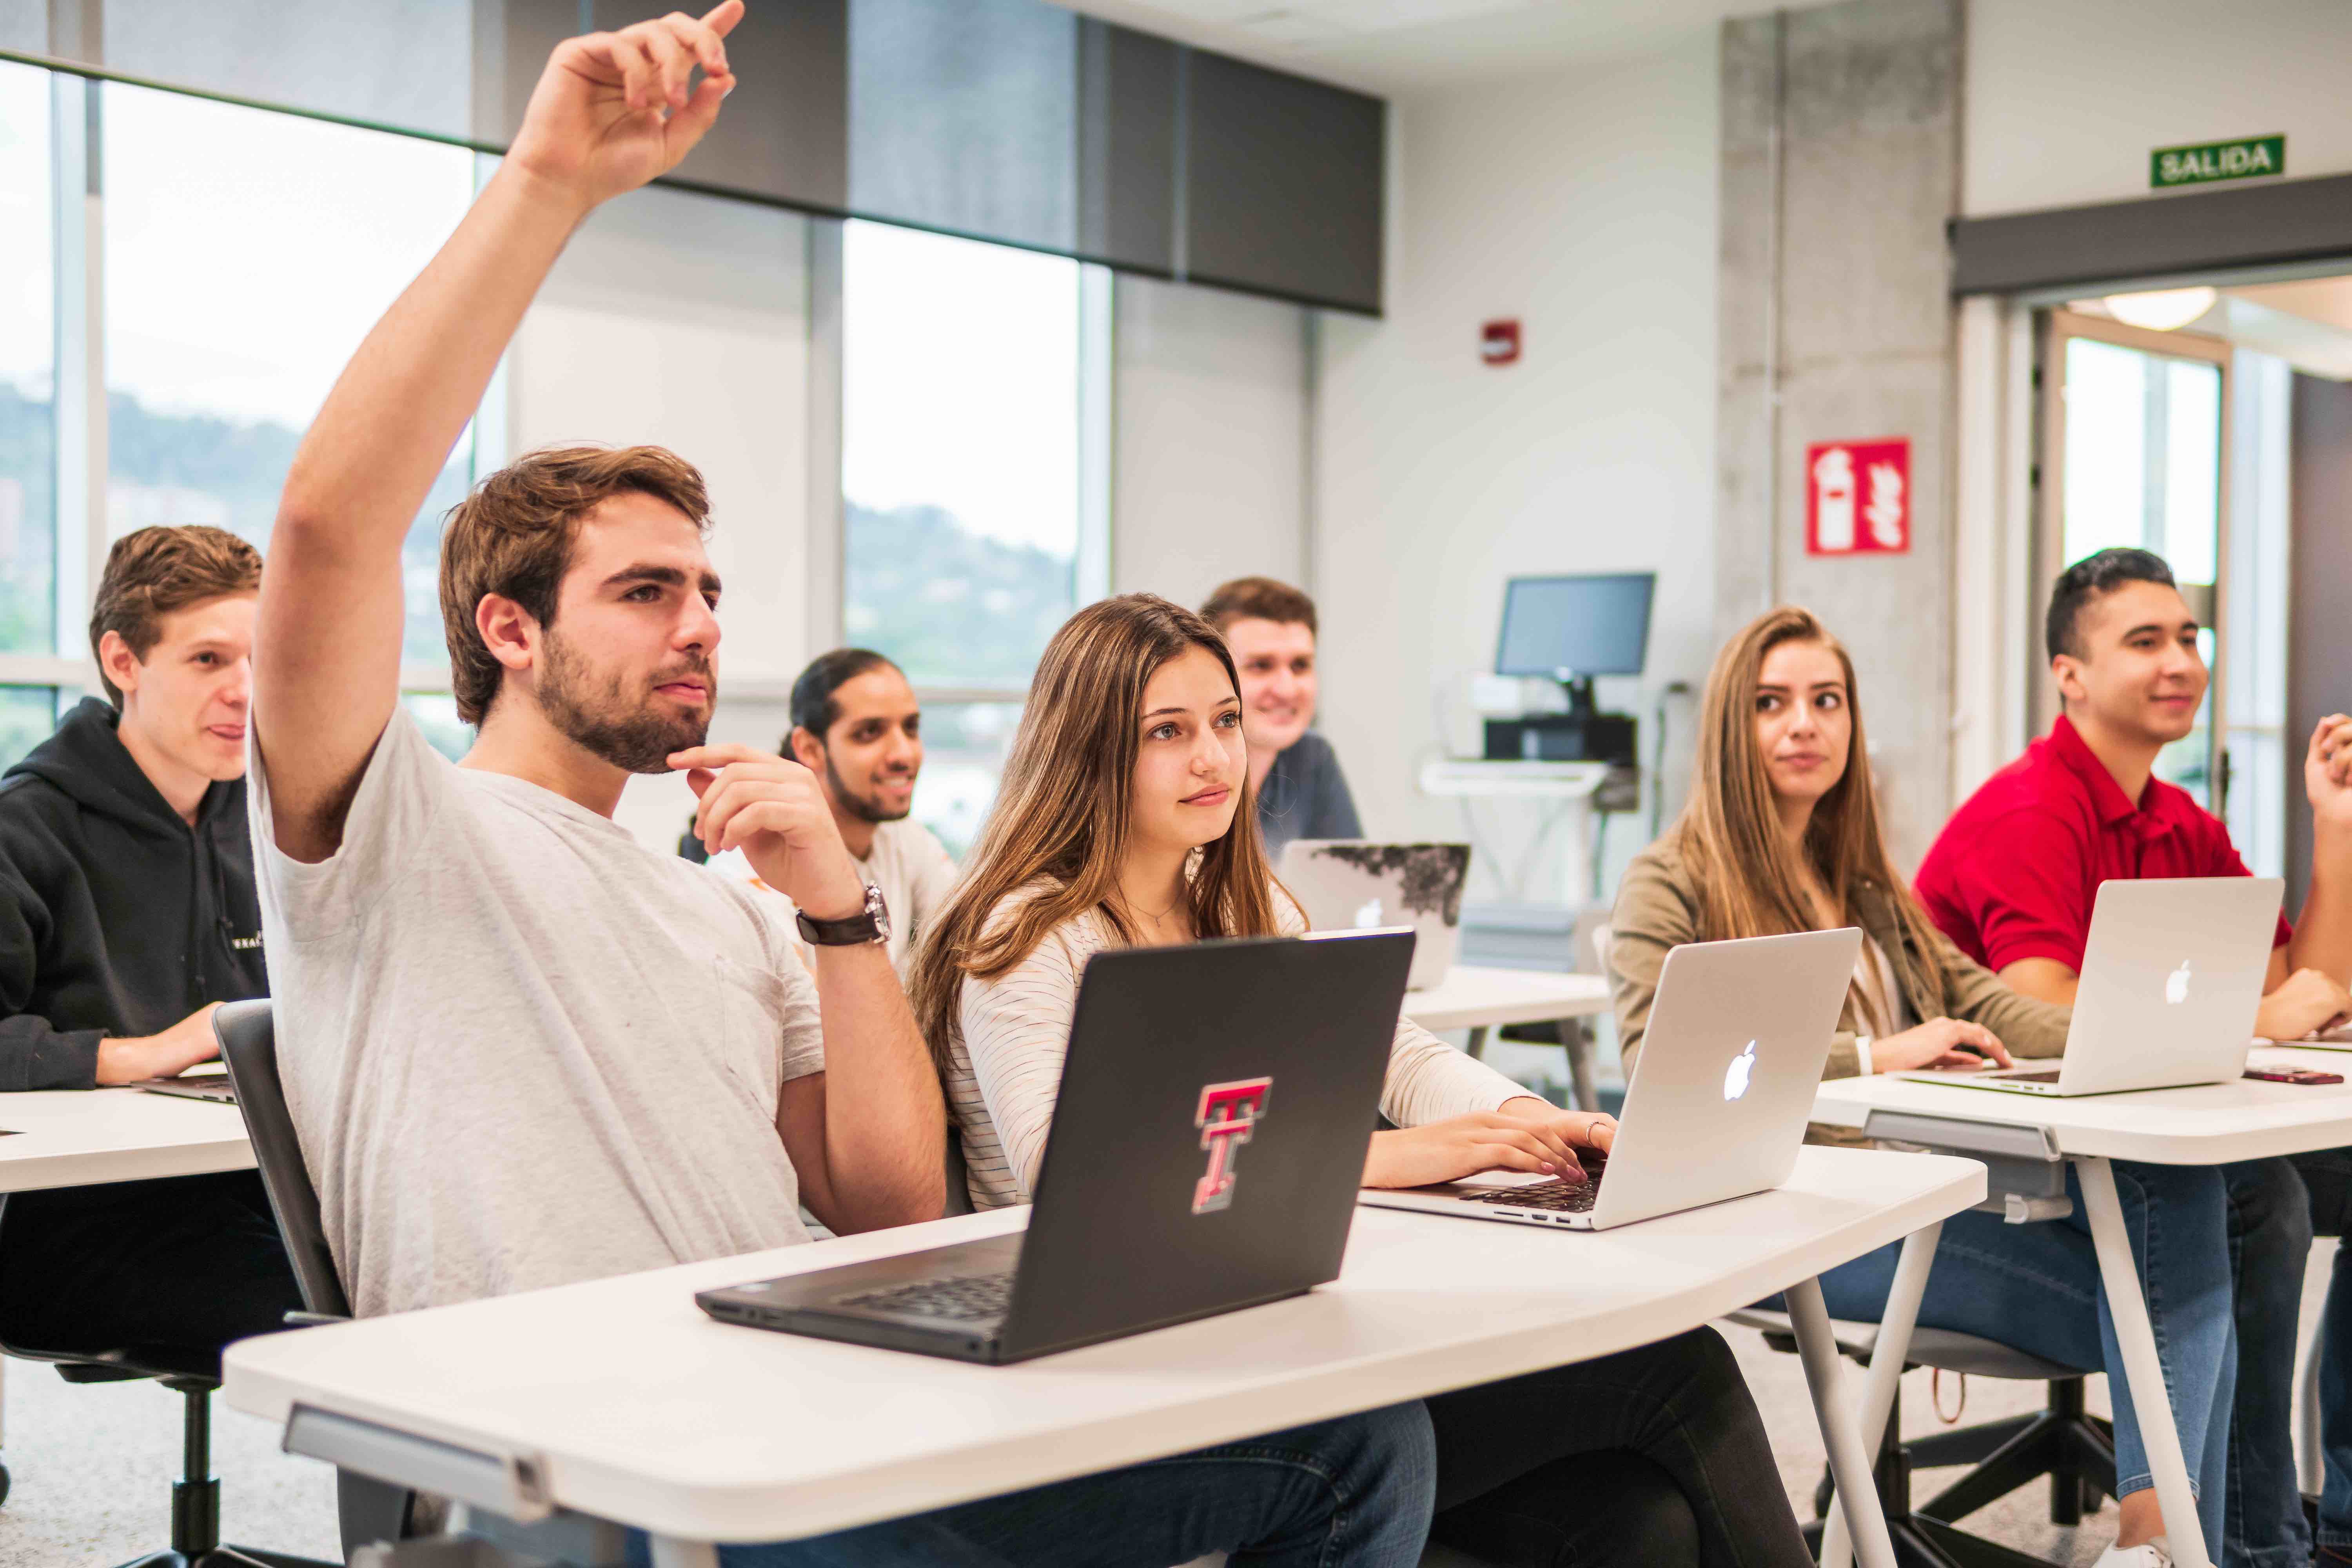 Students in class raising their hand